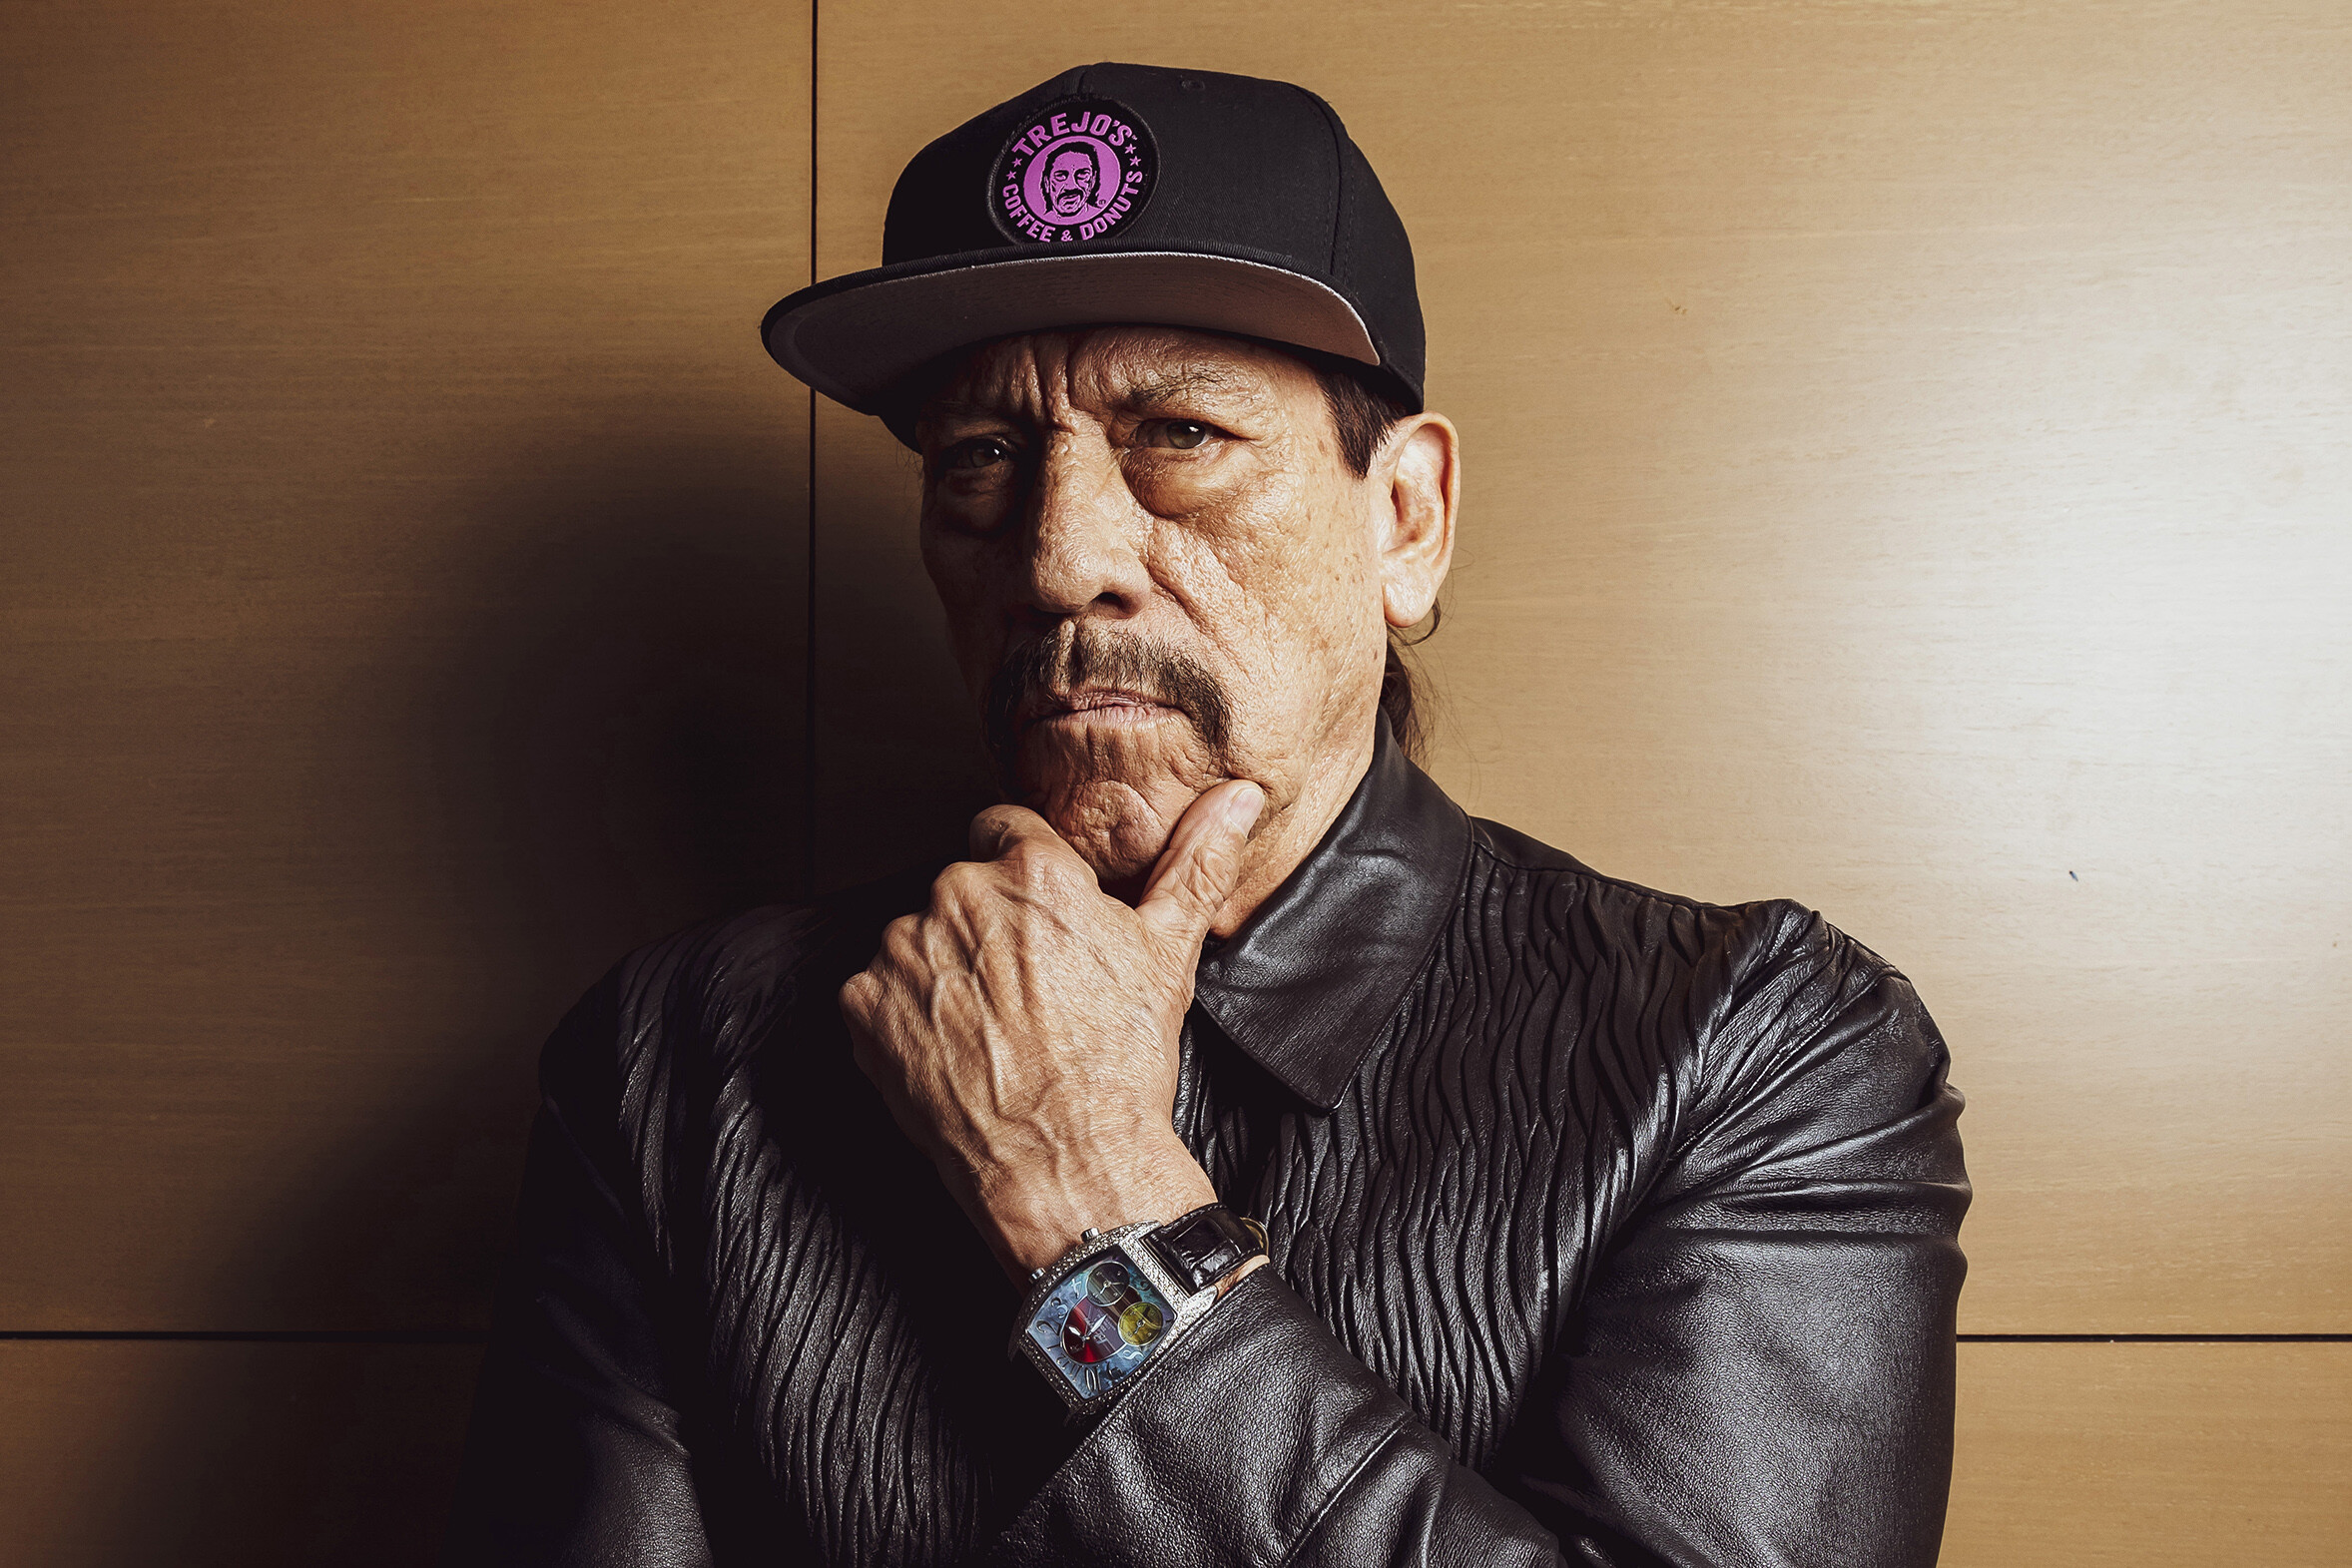 Danny Trejo: The world’s most recognizable character actor, Movies, “Desperado,” “Heat” and “Blood In, Blood Out”. 2360x1580 HD Background.